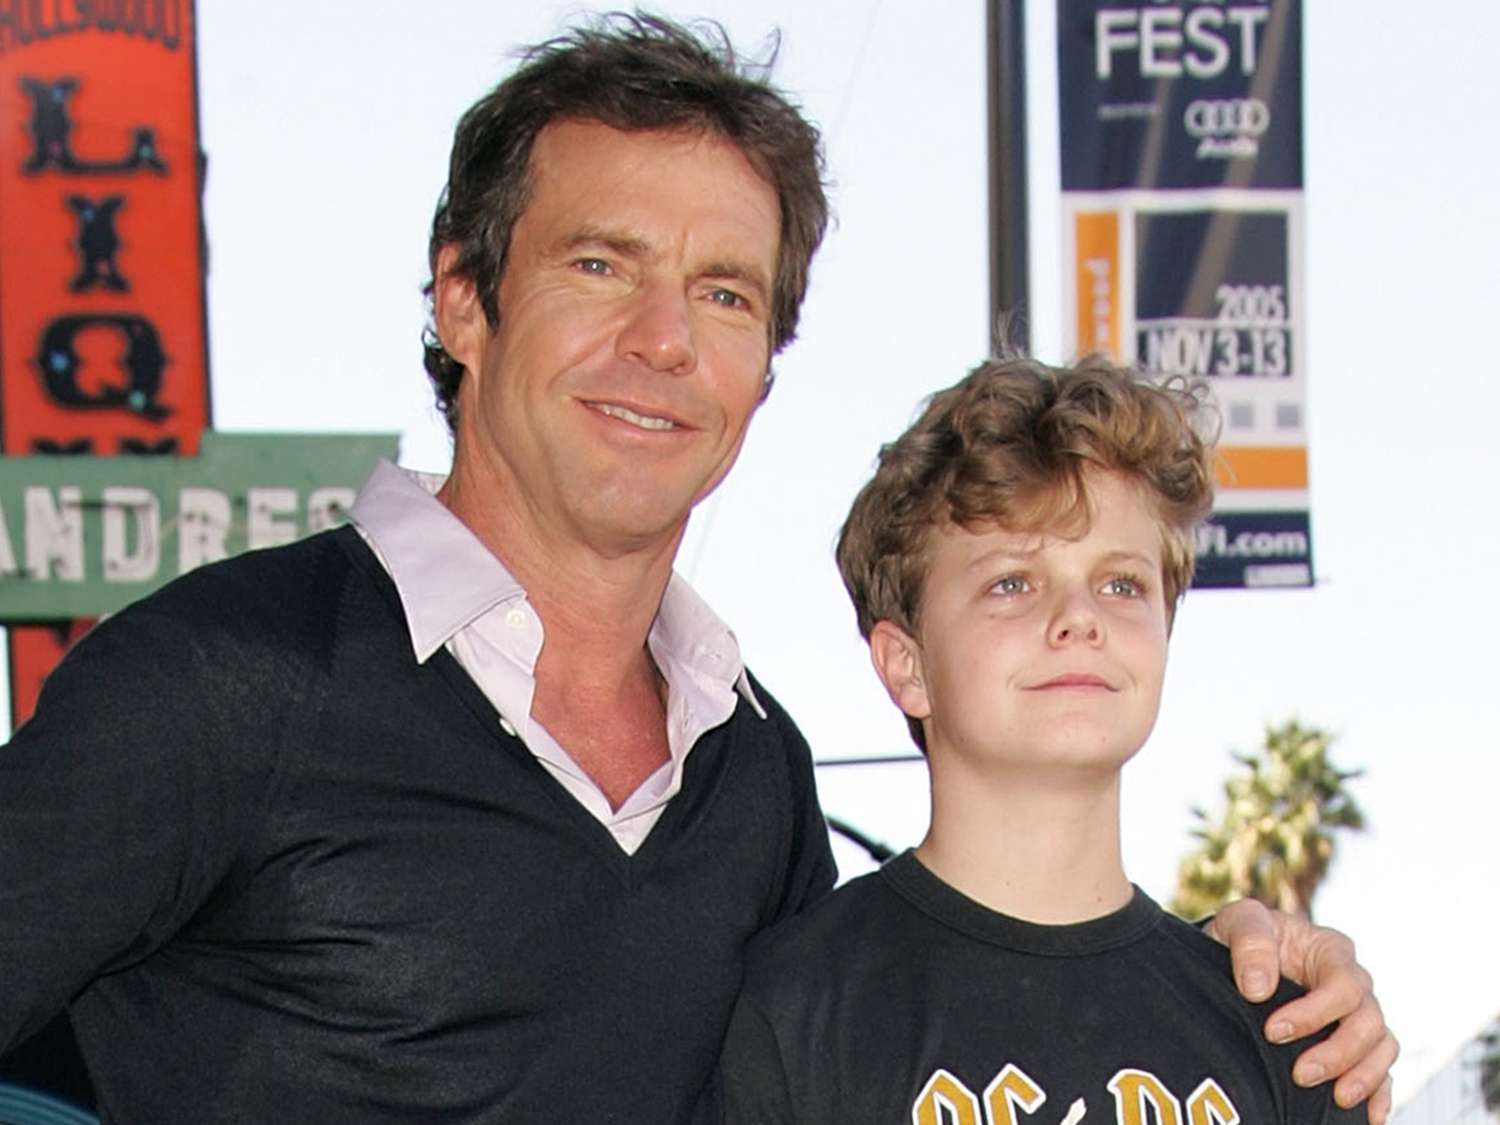 Dennis Quaid, with his son Jack, receives his Star On The Hollywood Walk Of Fame on Hollywood Blvd on November 16, 2005 in Hollywood, California